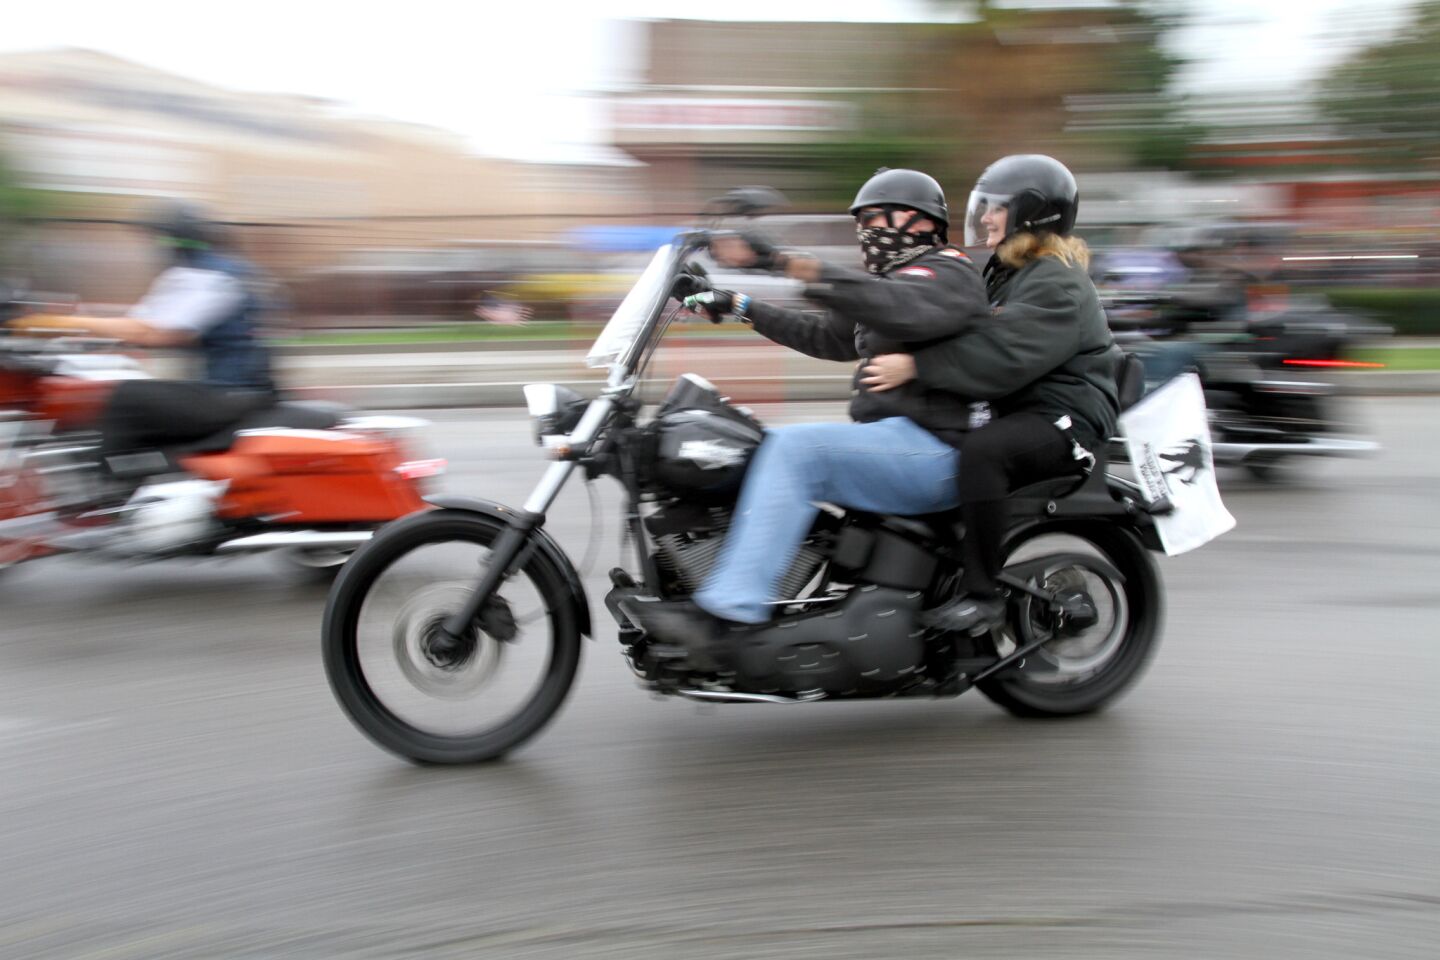 Riders take off on the 32nd annual Love Ride from at Harley-Davidson Motorcycles in Glendale on Sunday, October 18, 2015. This will be the last fundraising Love Ride.